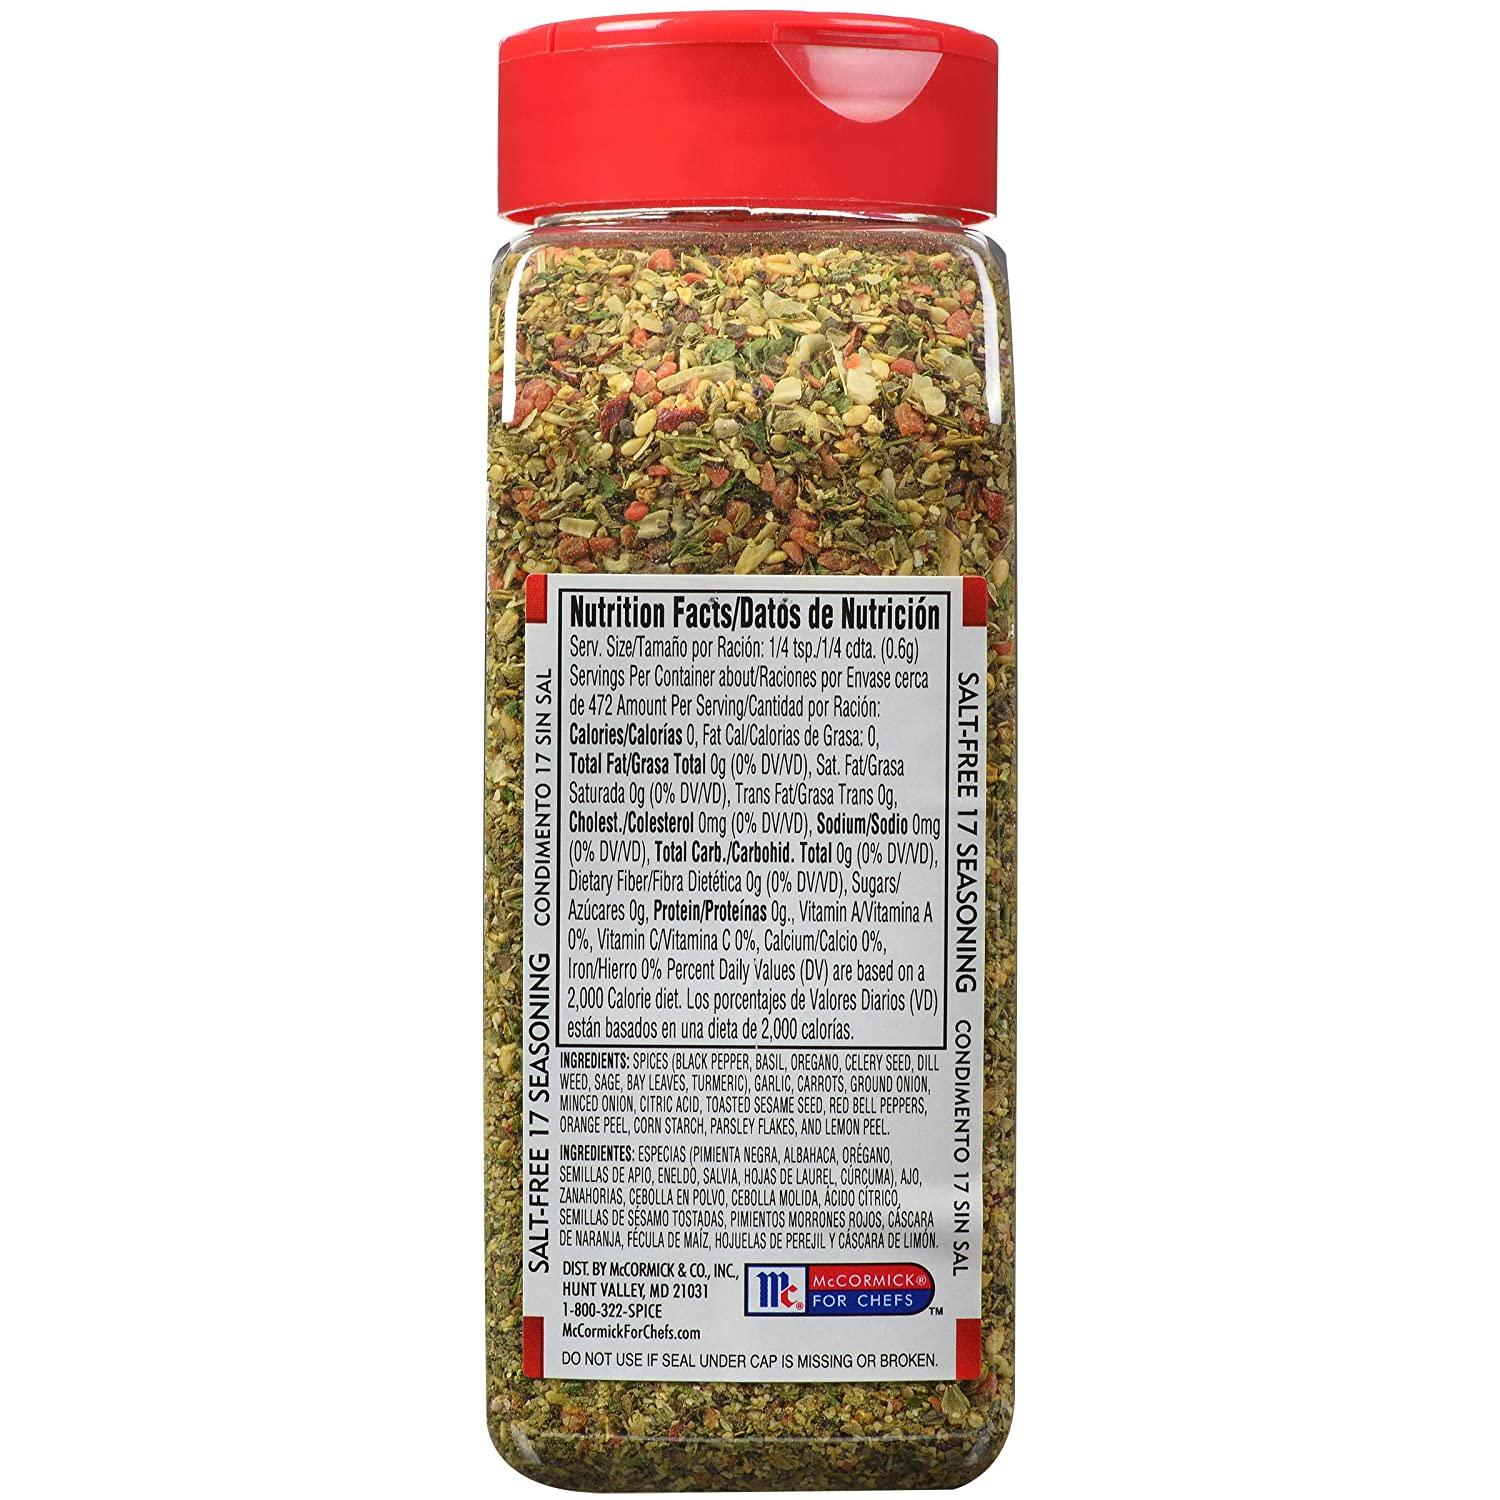 Lawry's Salt Free 17 Seasoning, 10 oz - One 10 Ounce Container of 17  Seasoning Spice Blend Including Toasted Sesame Seeds, Turmeric, Basil and  Red